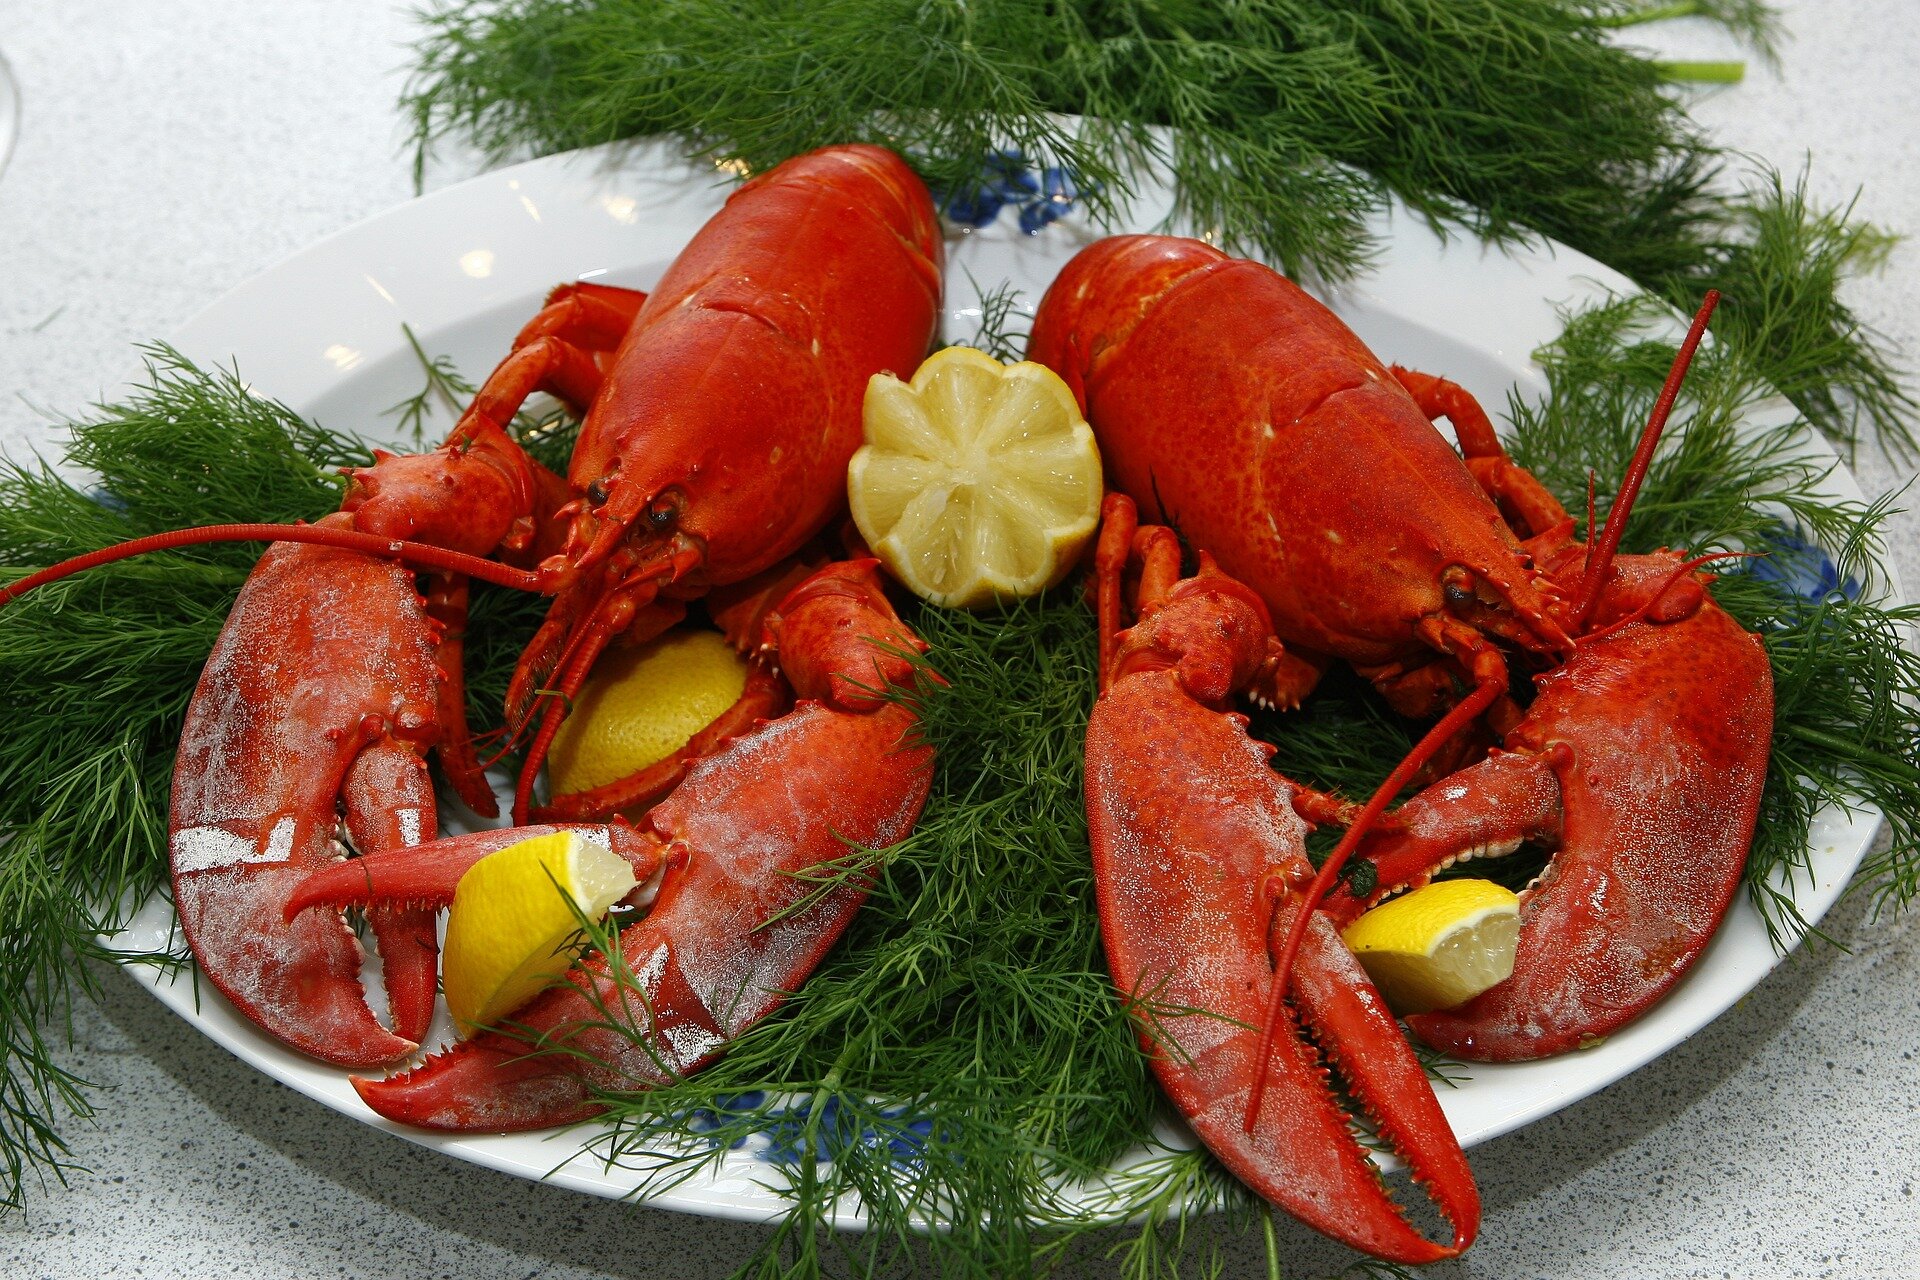 Chicken broth and lobster among 3,000 dishes served to King George III